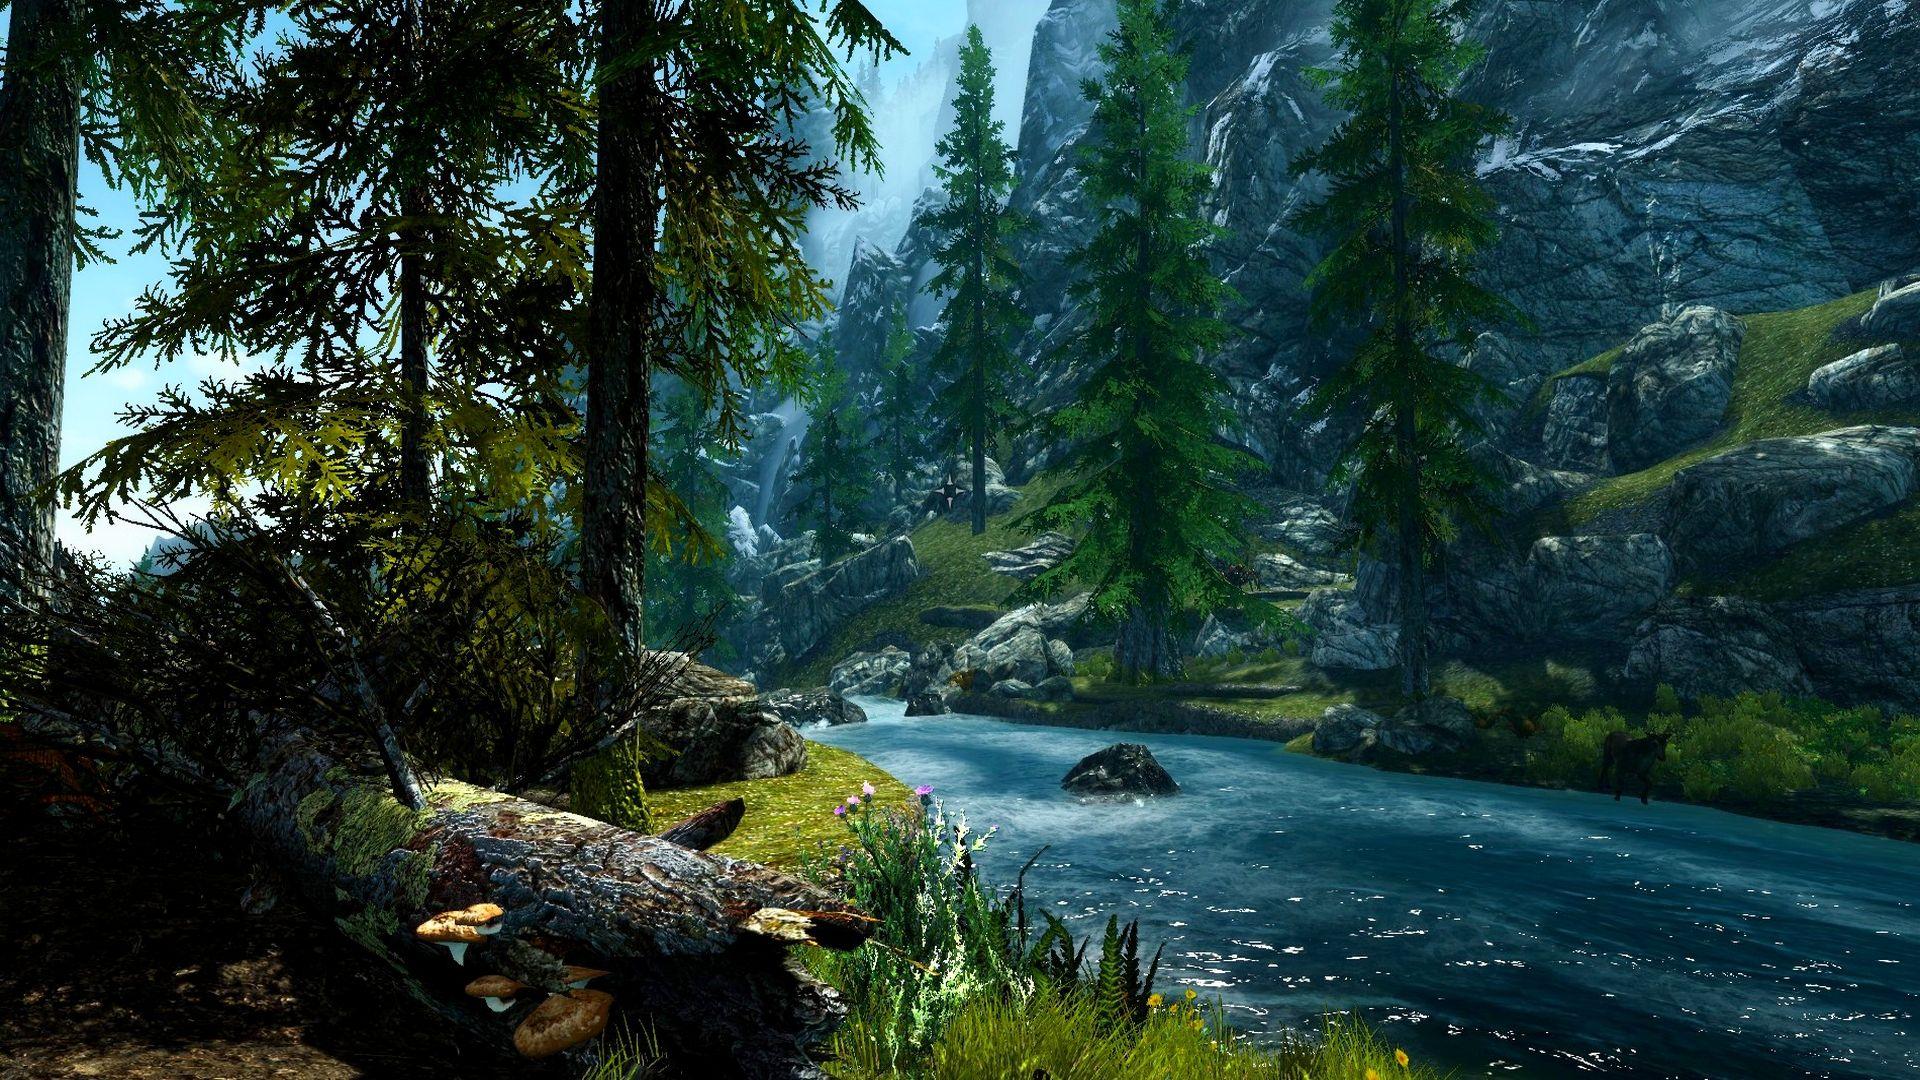 River in Mountain Forest Full HD Wallpaper